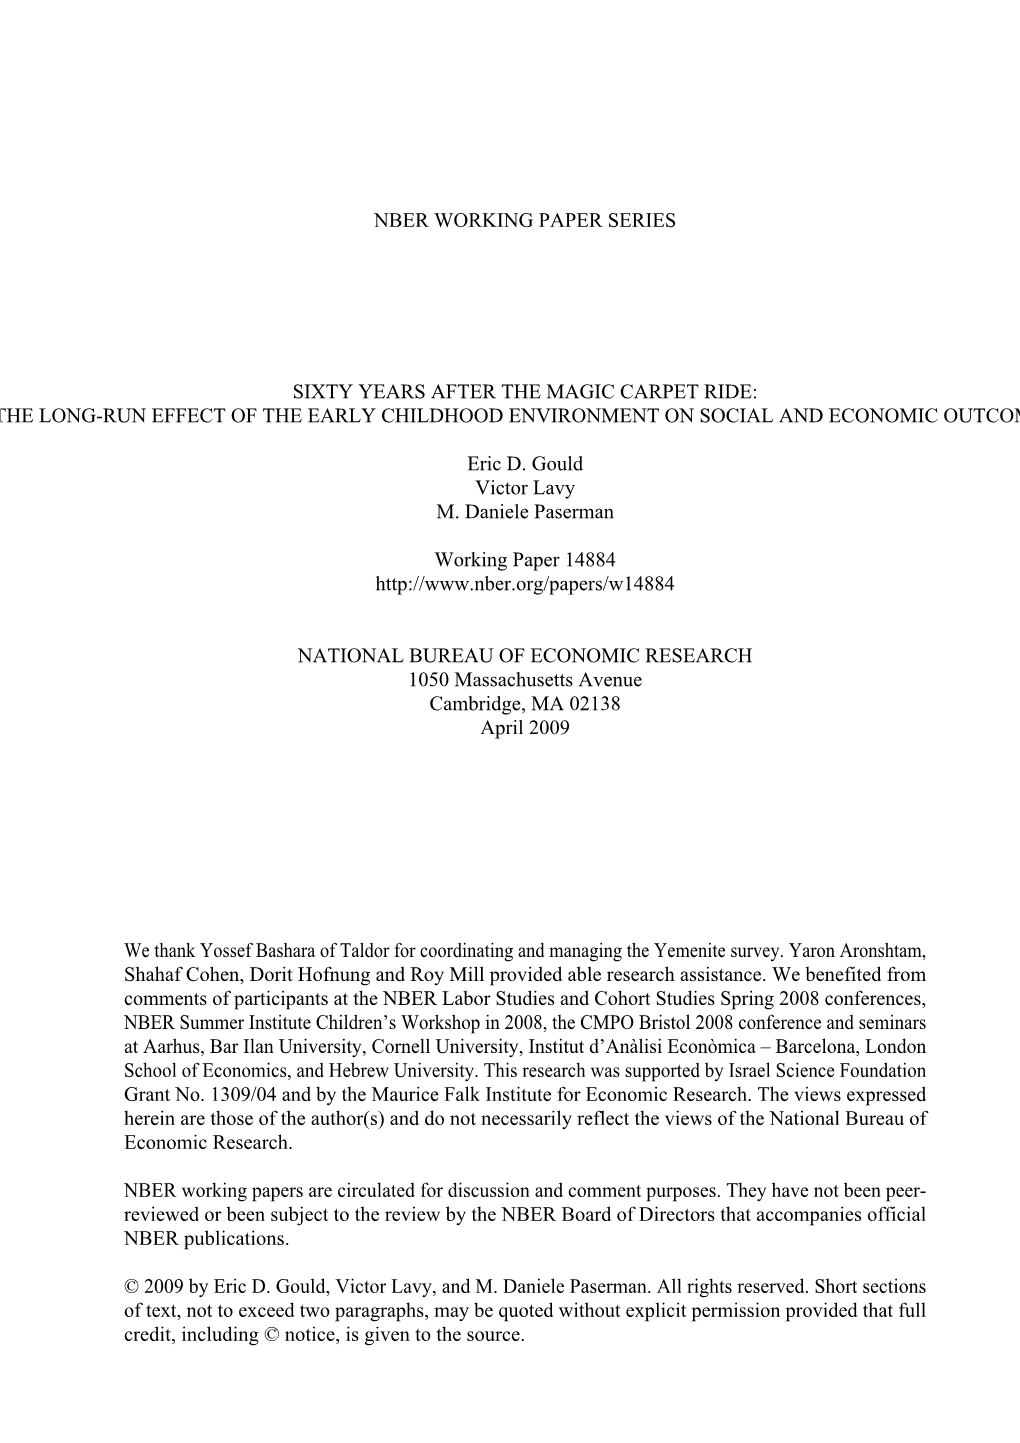 Nber Working Paper Series Sixty Years After the Magic